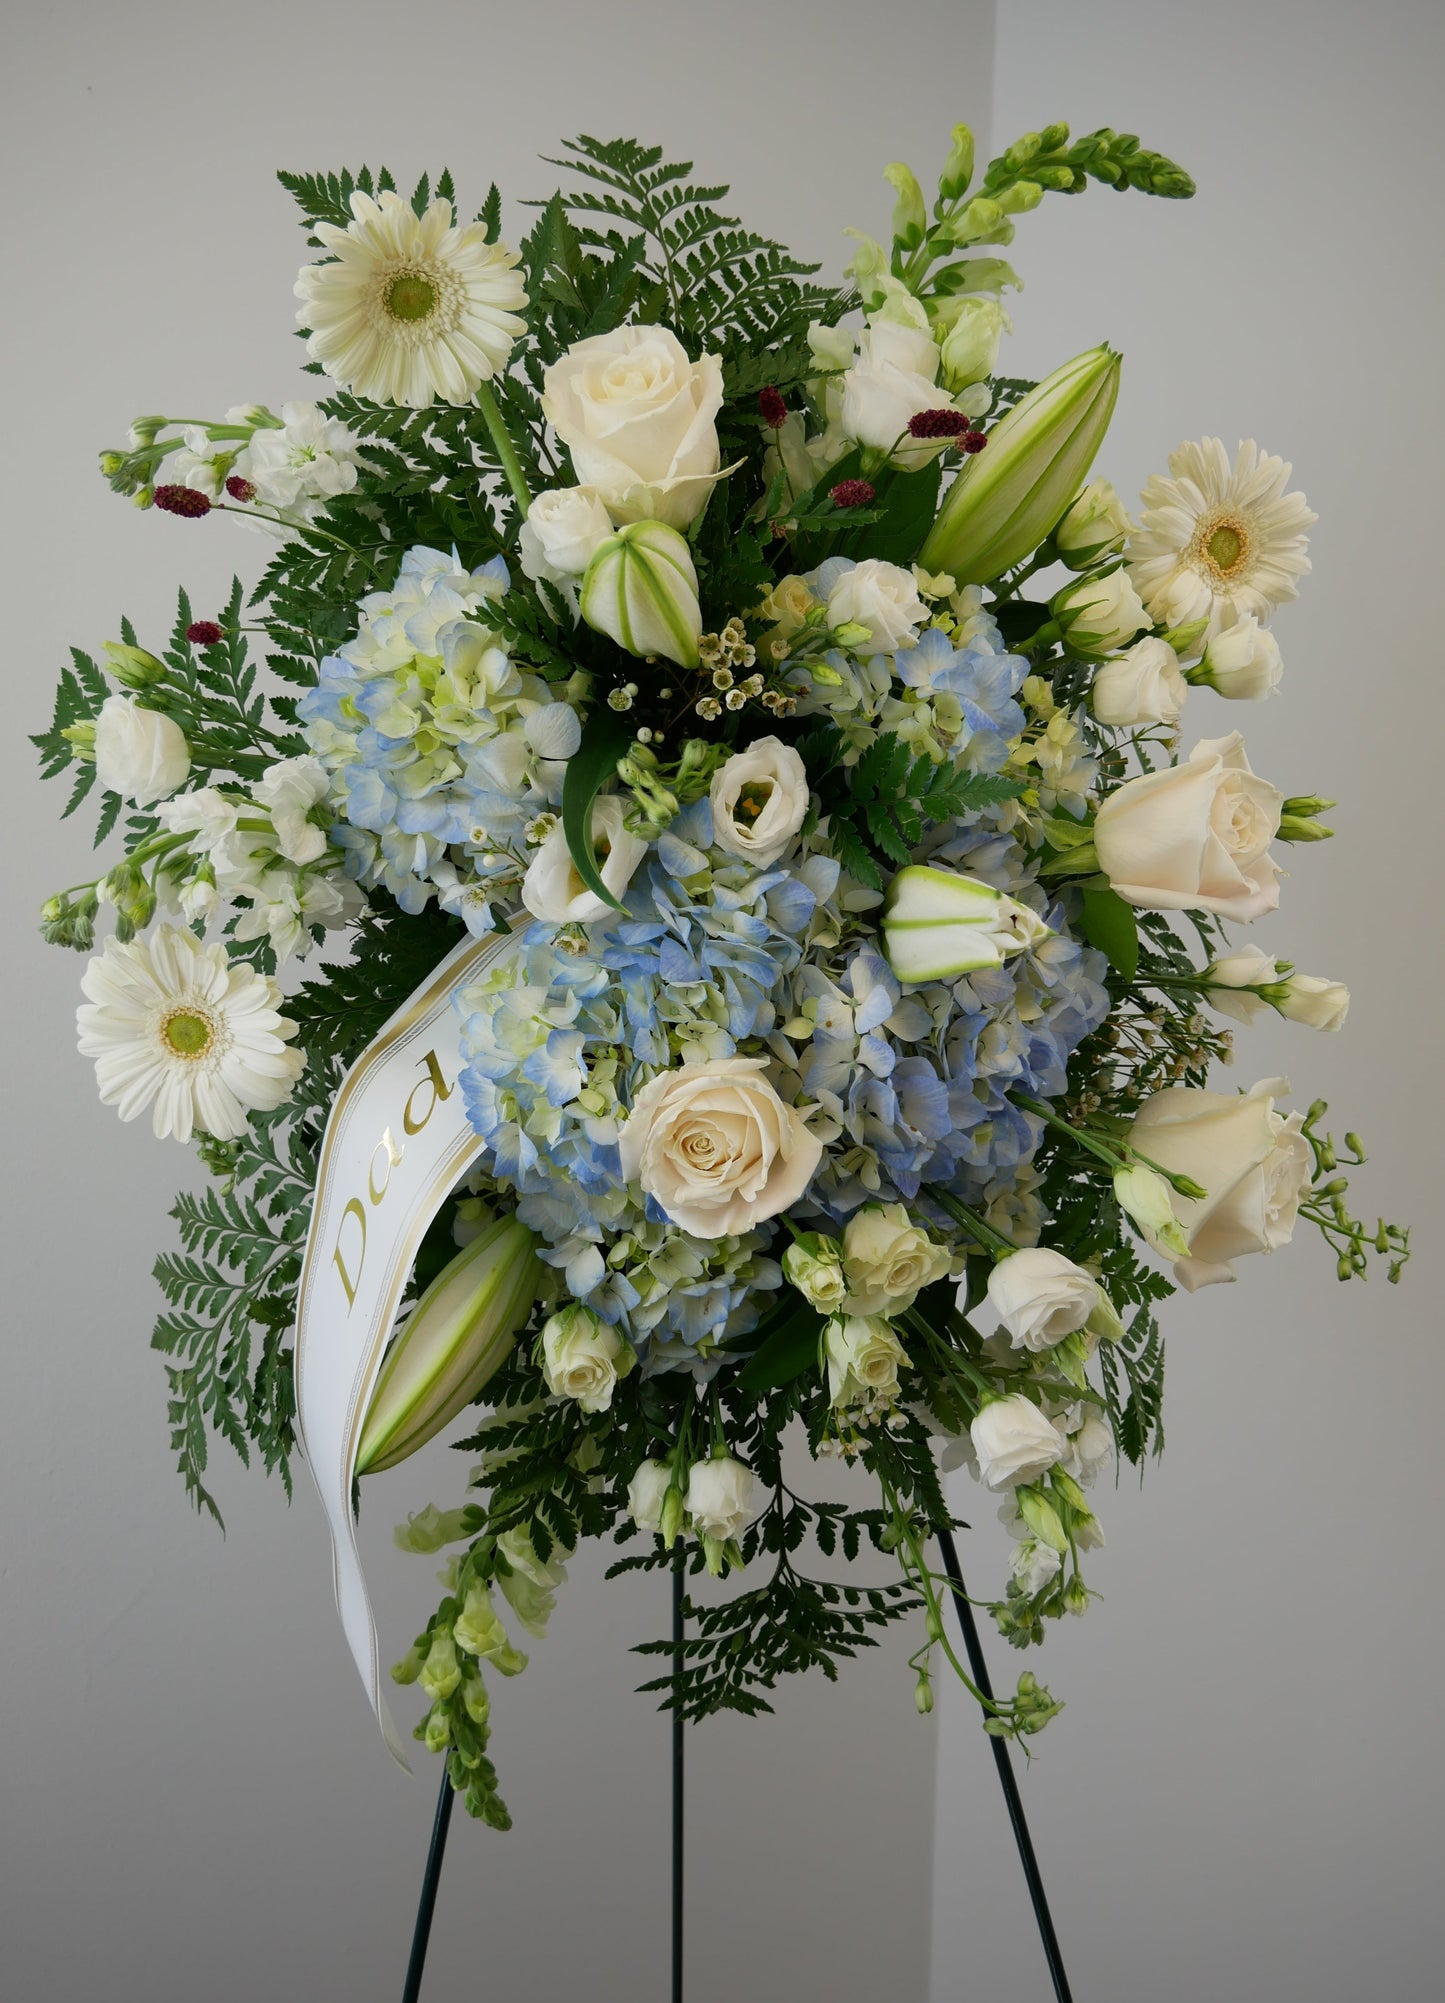 Funeral white and blue spray featuring hydrangea, roses, gerberas, lilies and other